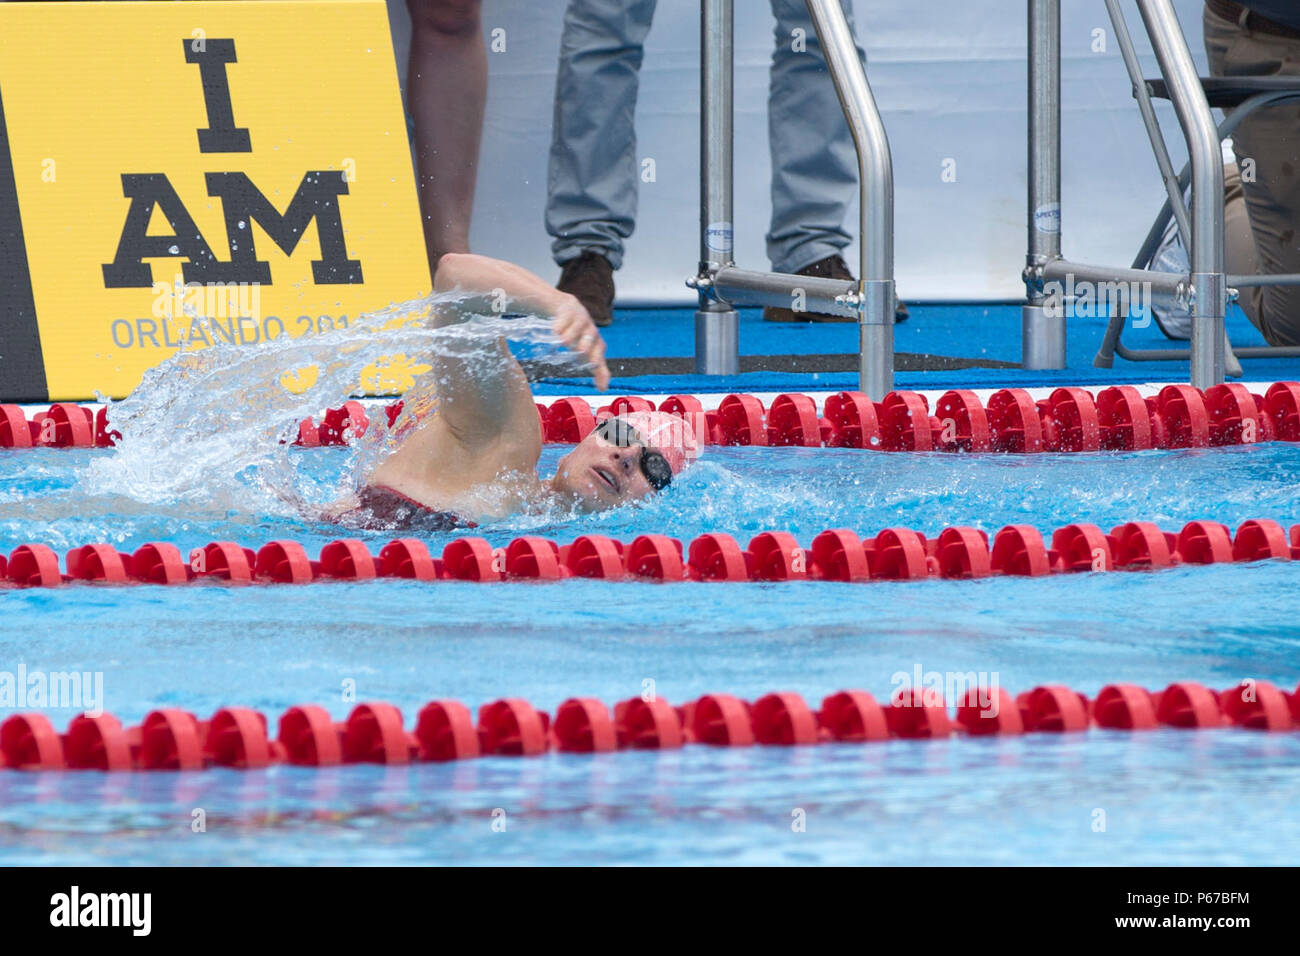 Christine Gauthier, Canada, competes in the 50 Meter Breaststroke swim event during the 2016 Invictus Games, ESPN Wide World of Sports Complex, Orlando, Fla., May 11, 2016. The Invictus Games are an adaptive sports competition which was created by Prince Harry of the United Kingdom after he was inspired by the DoD Warrior Games. This event brings together wounded, ill, and injured service members and veterans from 15 nations for events including: archery, cycling, indoor rowing, powerlifting, sitting volleyball, swimming, track and field, wheelchair basketball, wheelchair racing, wheelchair ru Stock Photo